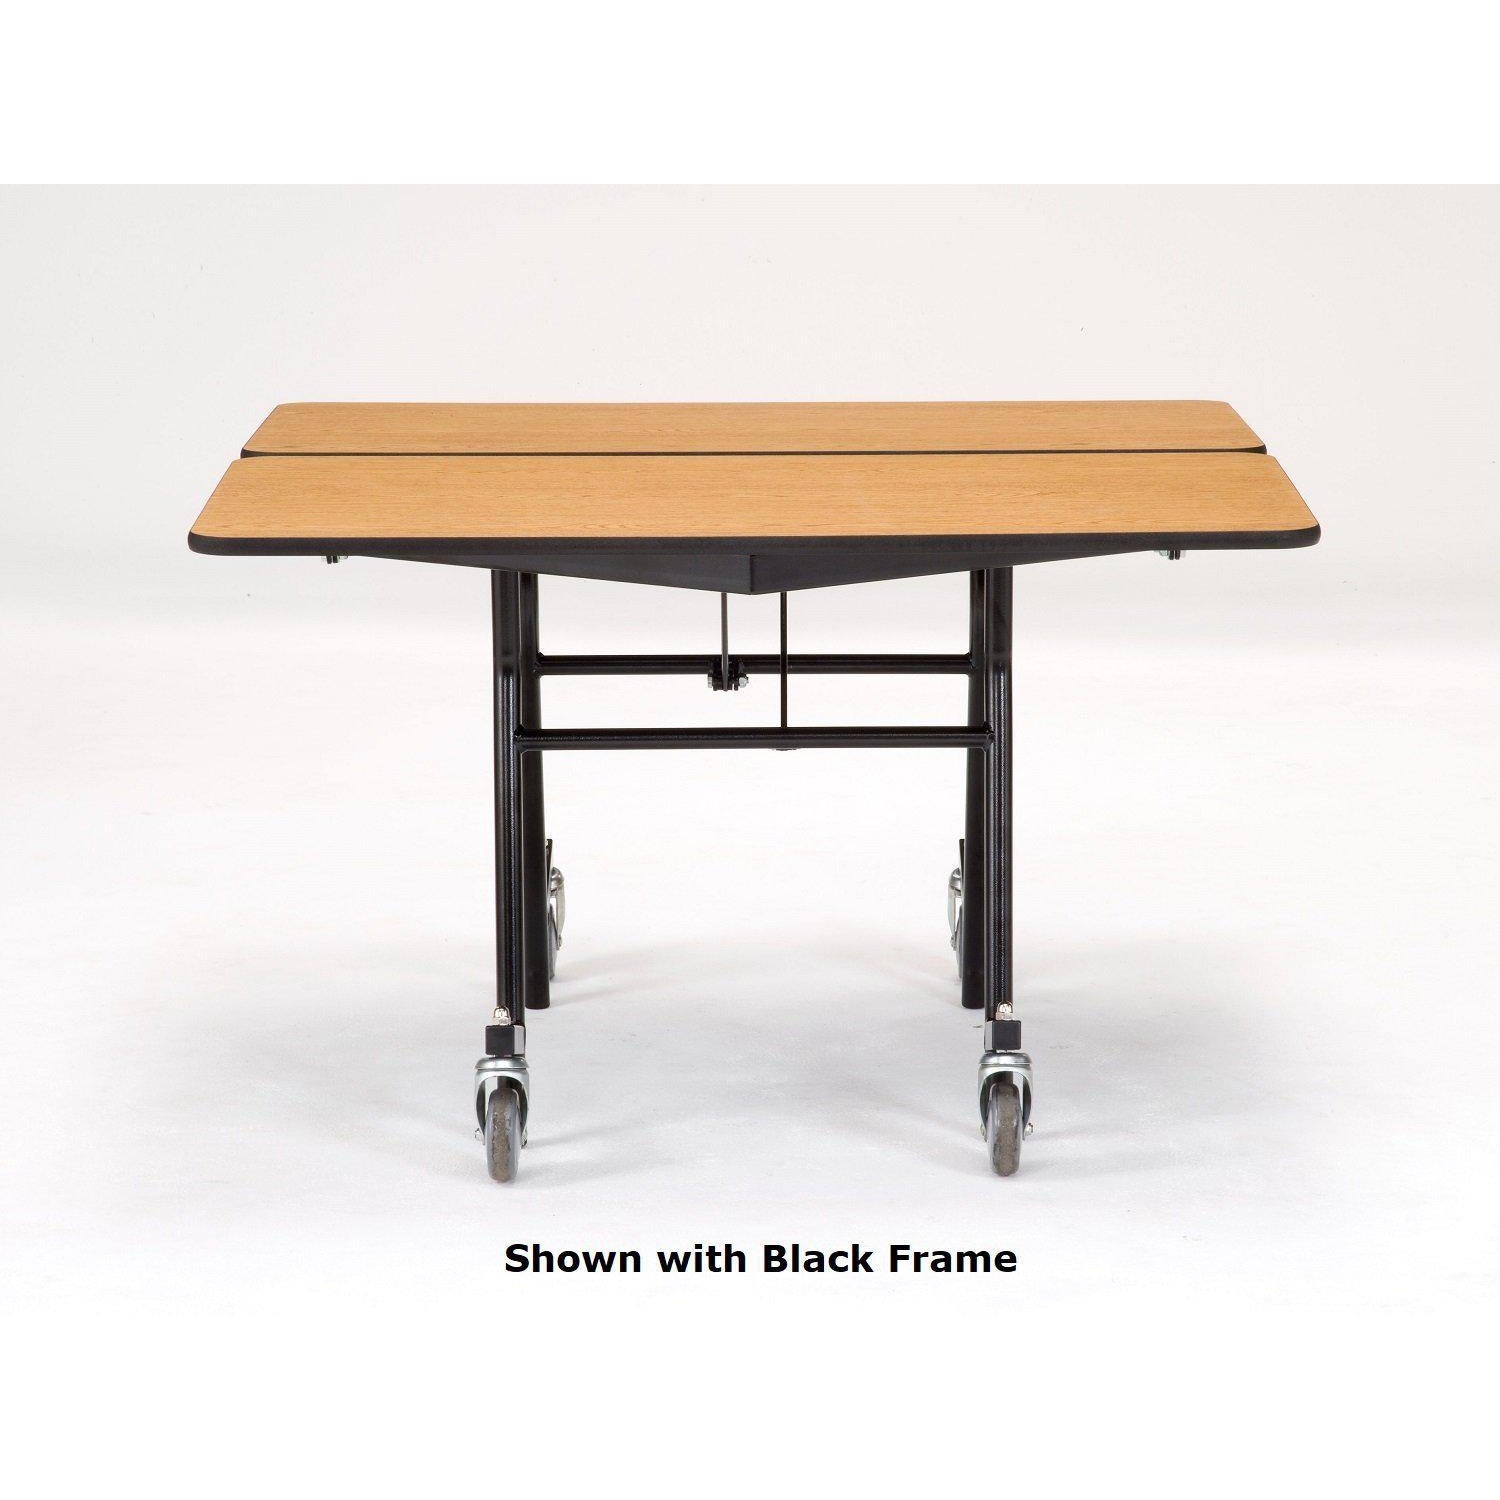 Mobile Shape Cafeteria Table, 60" Square, Particleboard Core, Vinyl T-Mold Edge, Chrome Frame